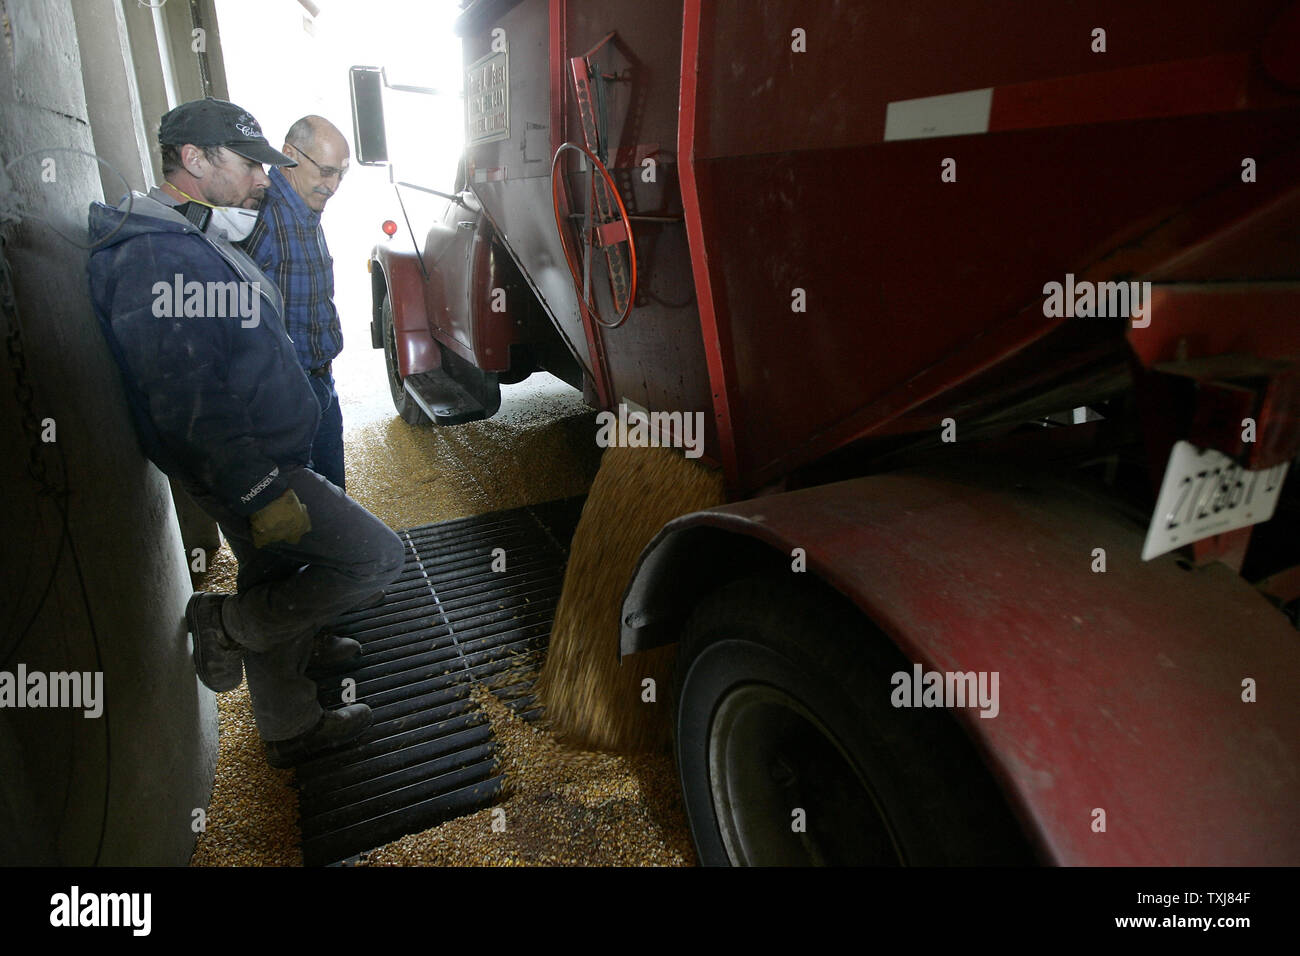 Gary Weber (L) stands with Chester Cleveland as he unloads his son's corn at the grain elevator in Manteno, Illinois on October 20, 2008. Corn for December delivery rose $0.155 per bushel at the Chicago Board of Trade closing at $4.185 Monday as rebounding oil markets shift investor focus to commodities. (UPI Photo/Brian Kersey) Stock Photo